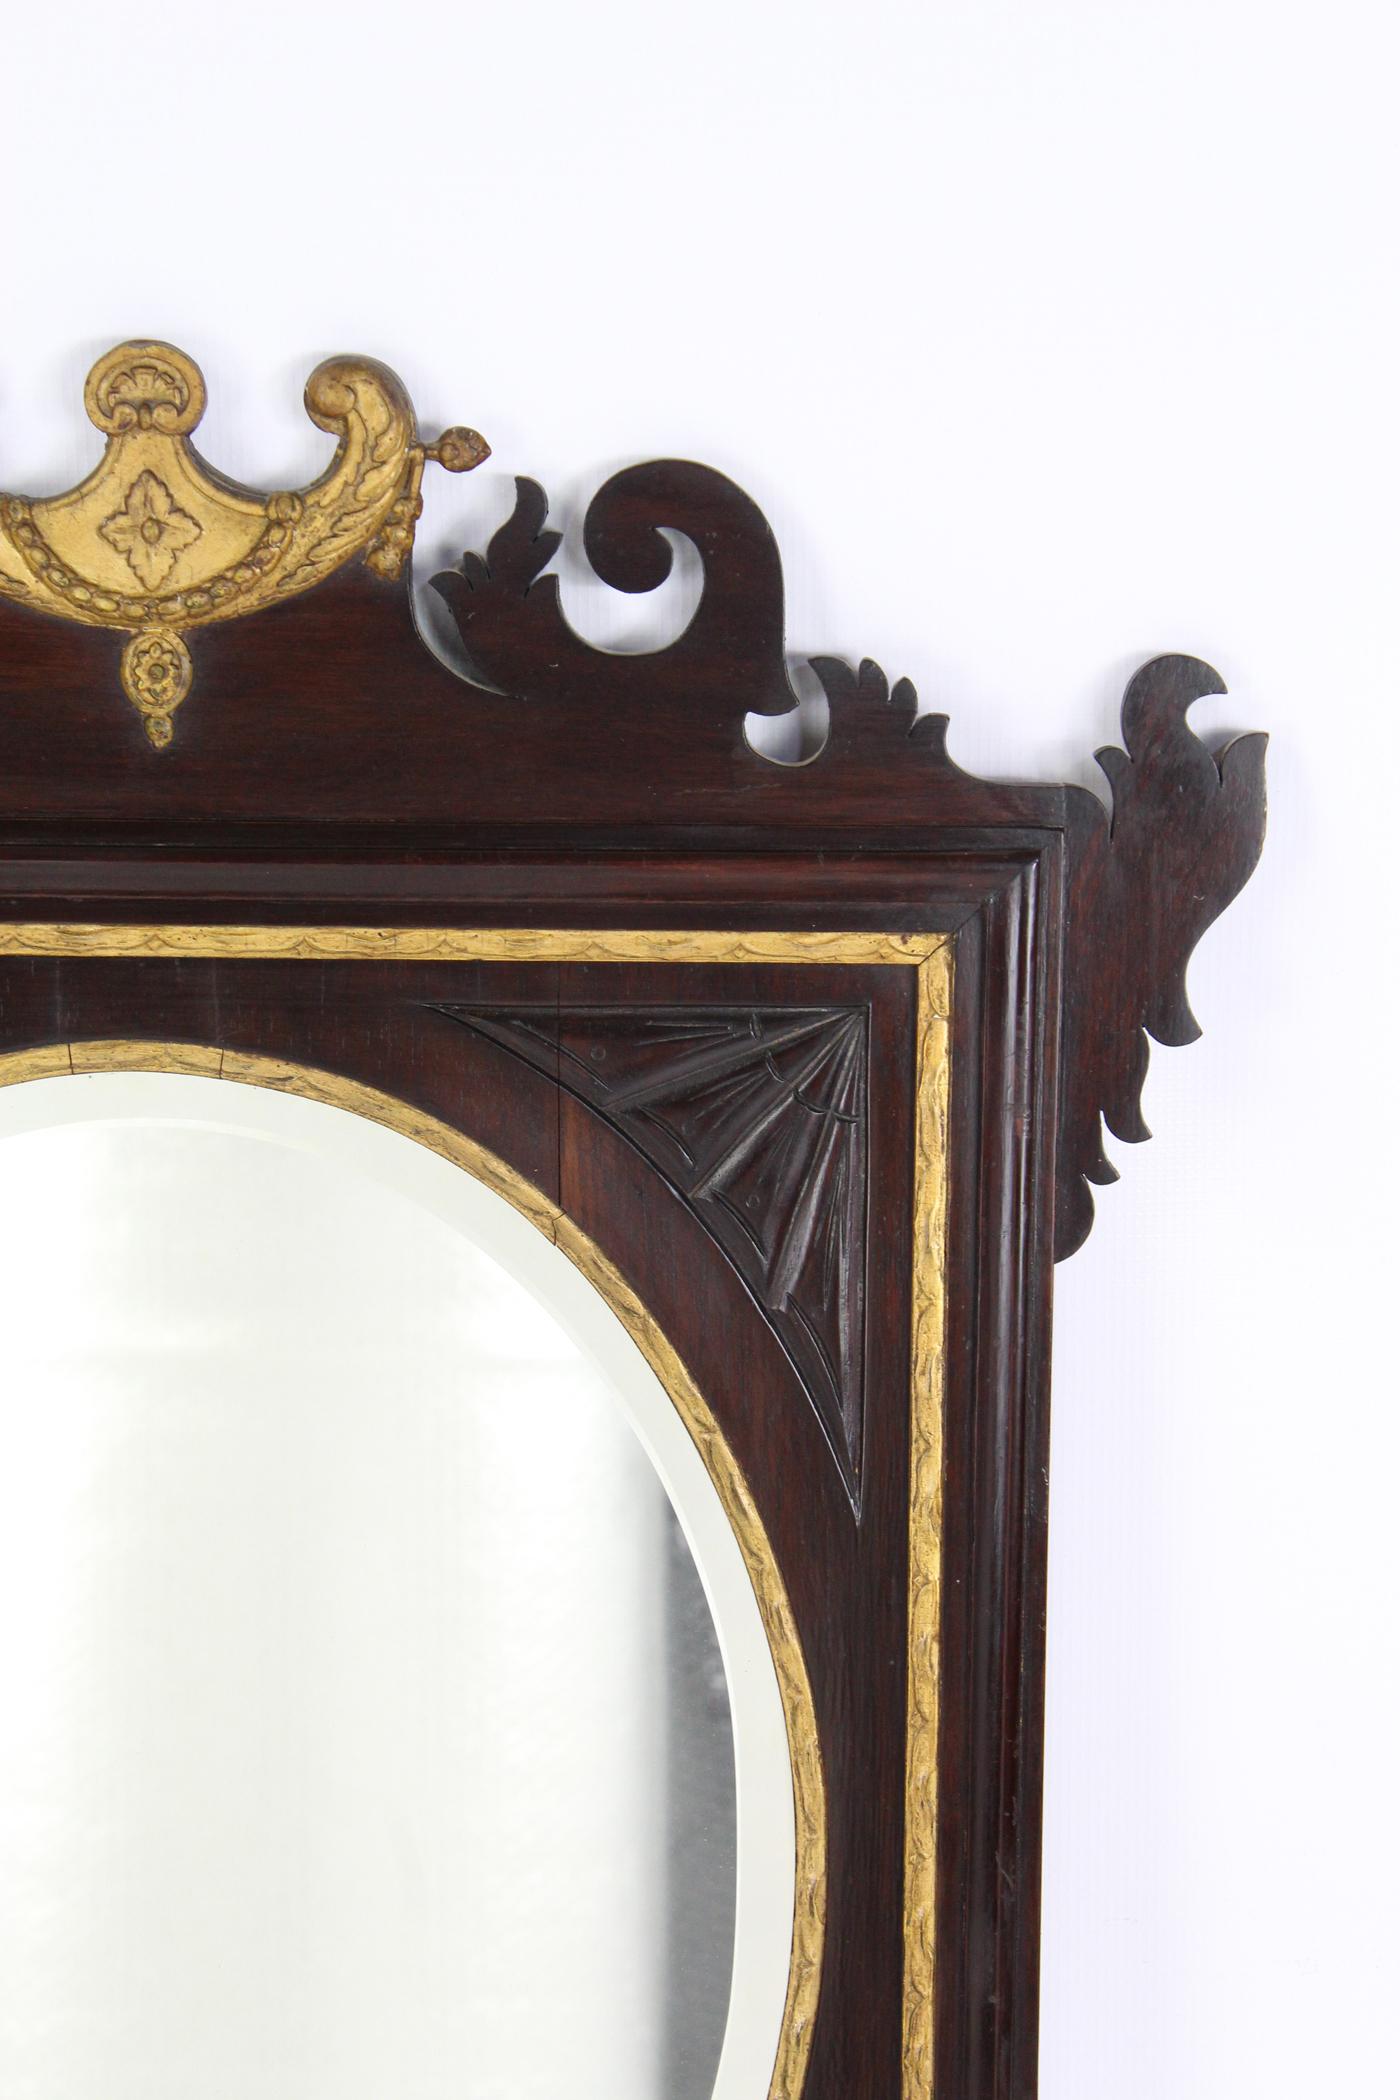 An antique Edwardian mahogany and parcel gilt framed fretwork wall mirror dating from circa 1910. The scroll pediment with a gilt crest and swag, the oval bevelled mirror plate with moulded gilt slip surround and carved spandrels to each corner.